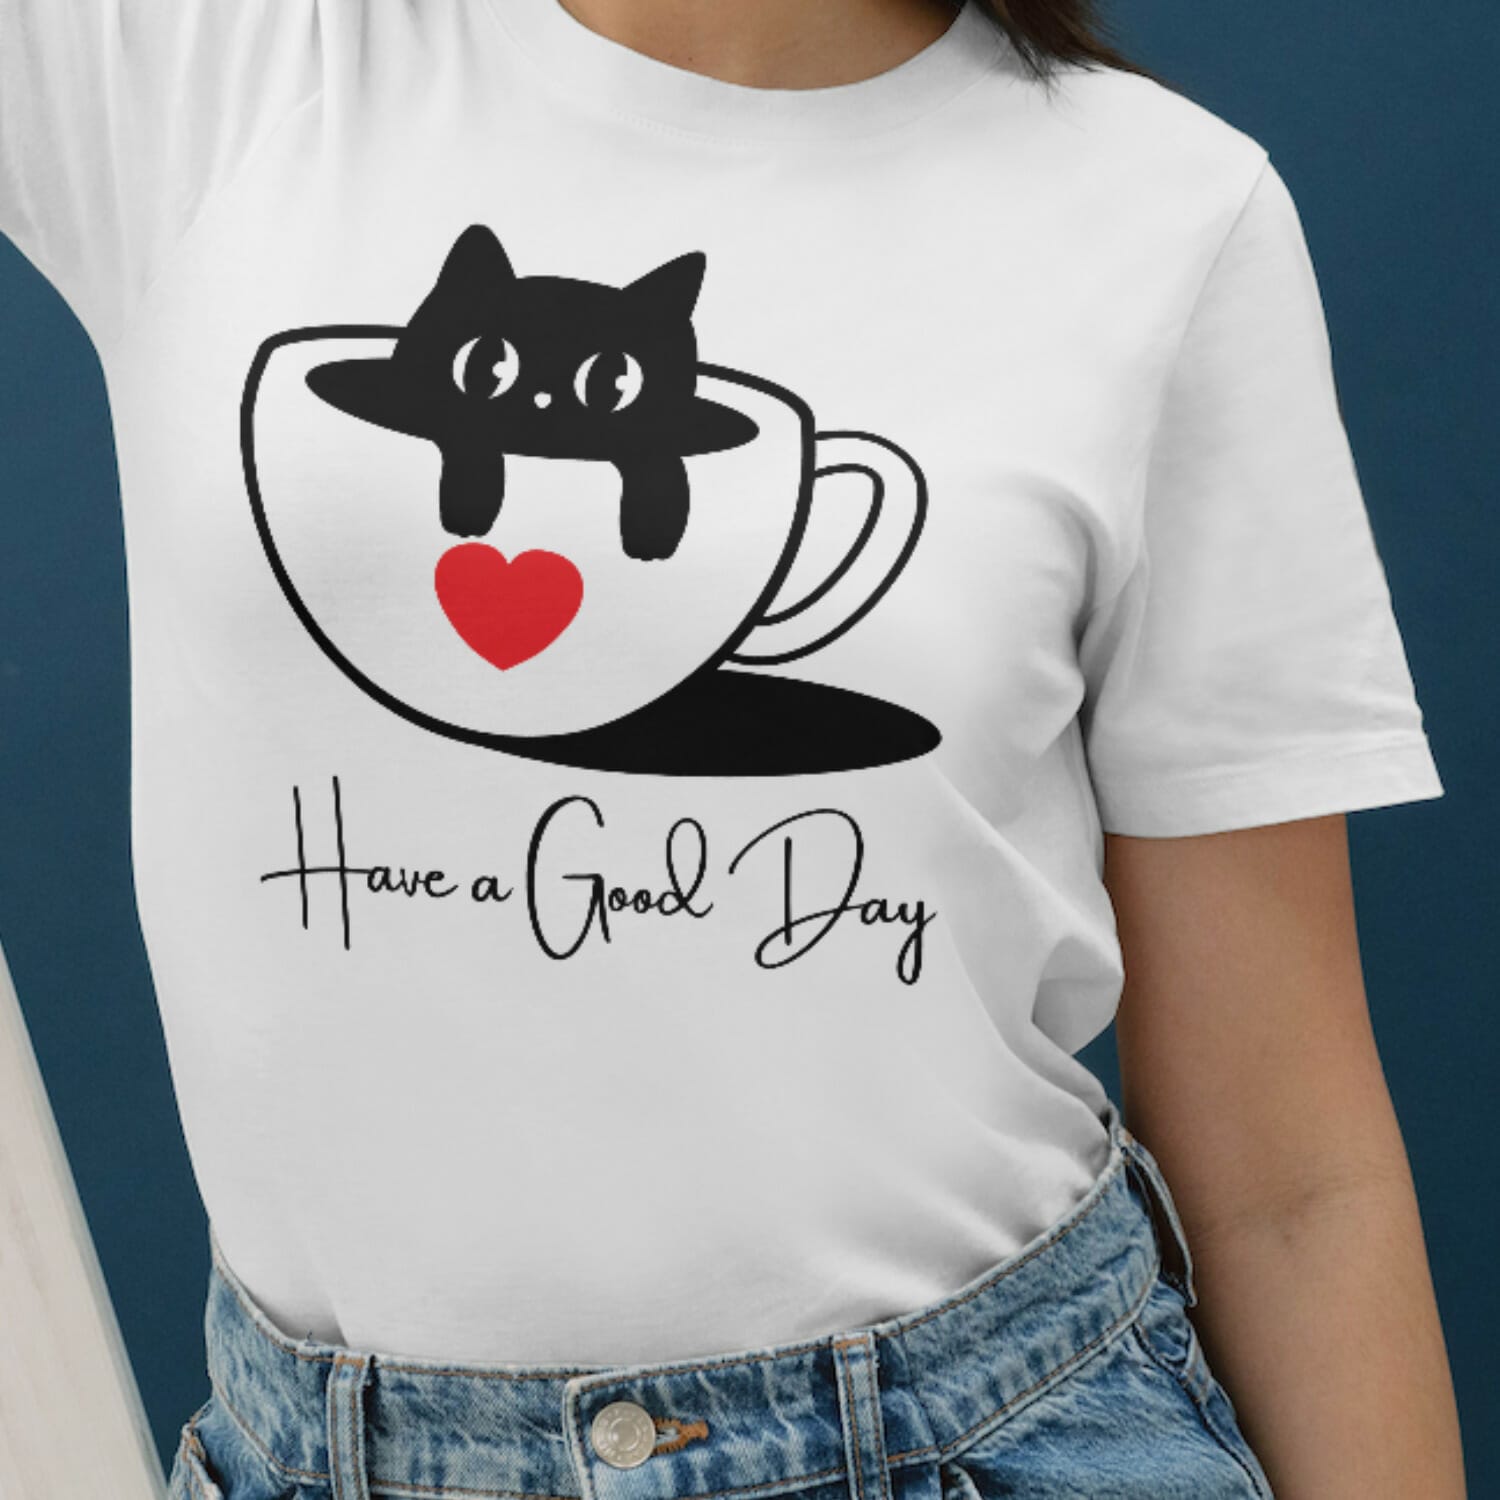 Cute Cat in a Tea Cup Tshirt Design - Have a Good Day